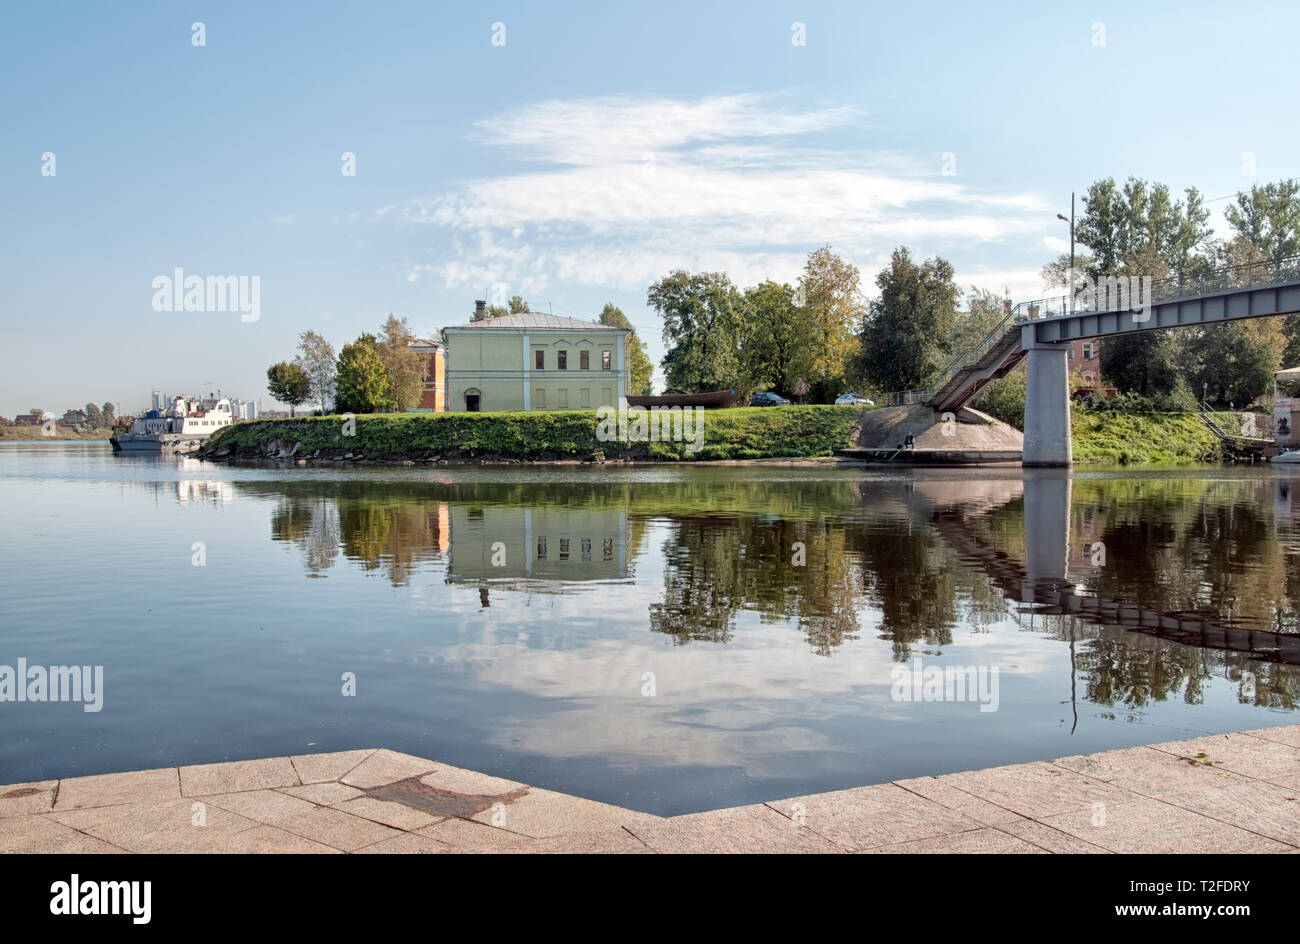 UST-IZHORA, SAINT-PETERSBURG, RUSSIA – SEPTEMBER 19, 2018: View The Museum of Alexander Nevsky and Izhora Land from the place where the rivers connect Stock Photo